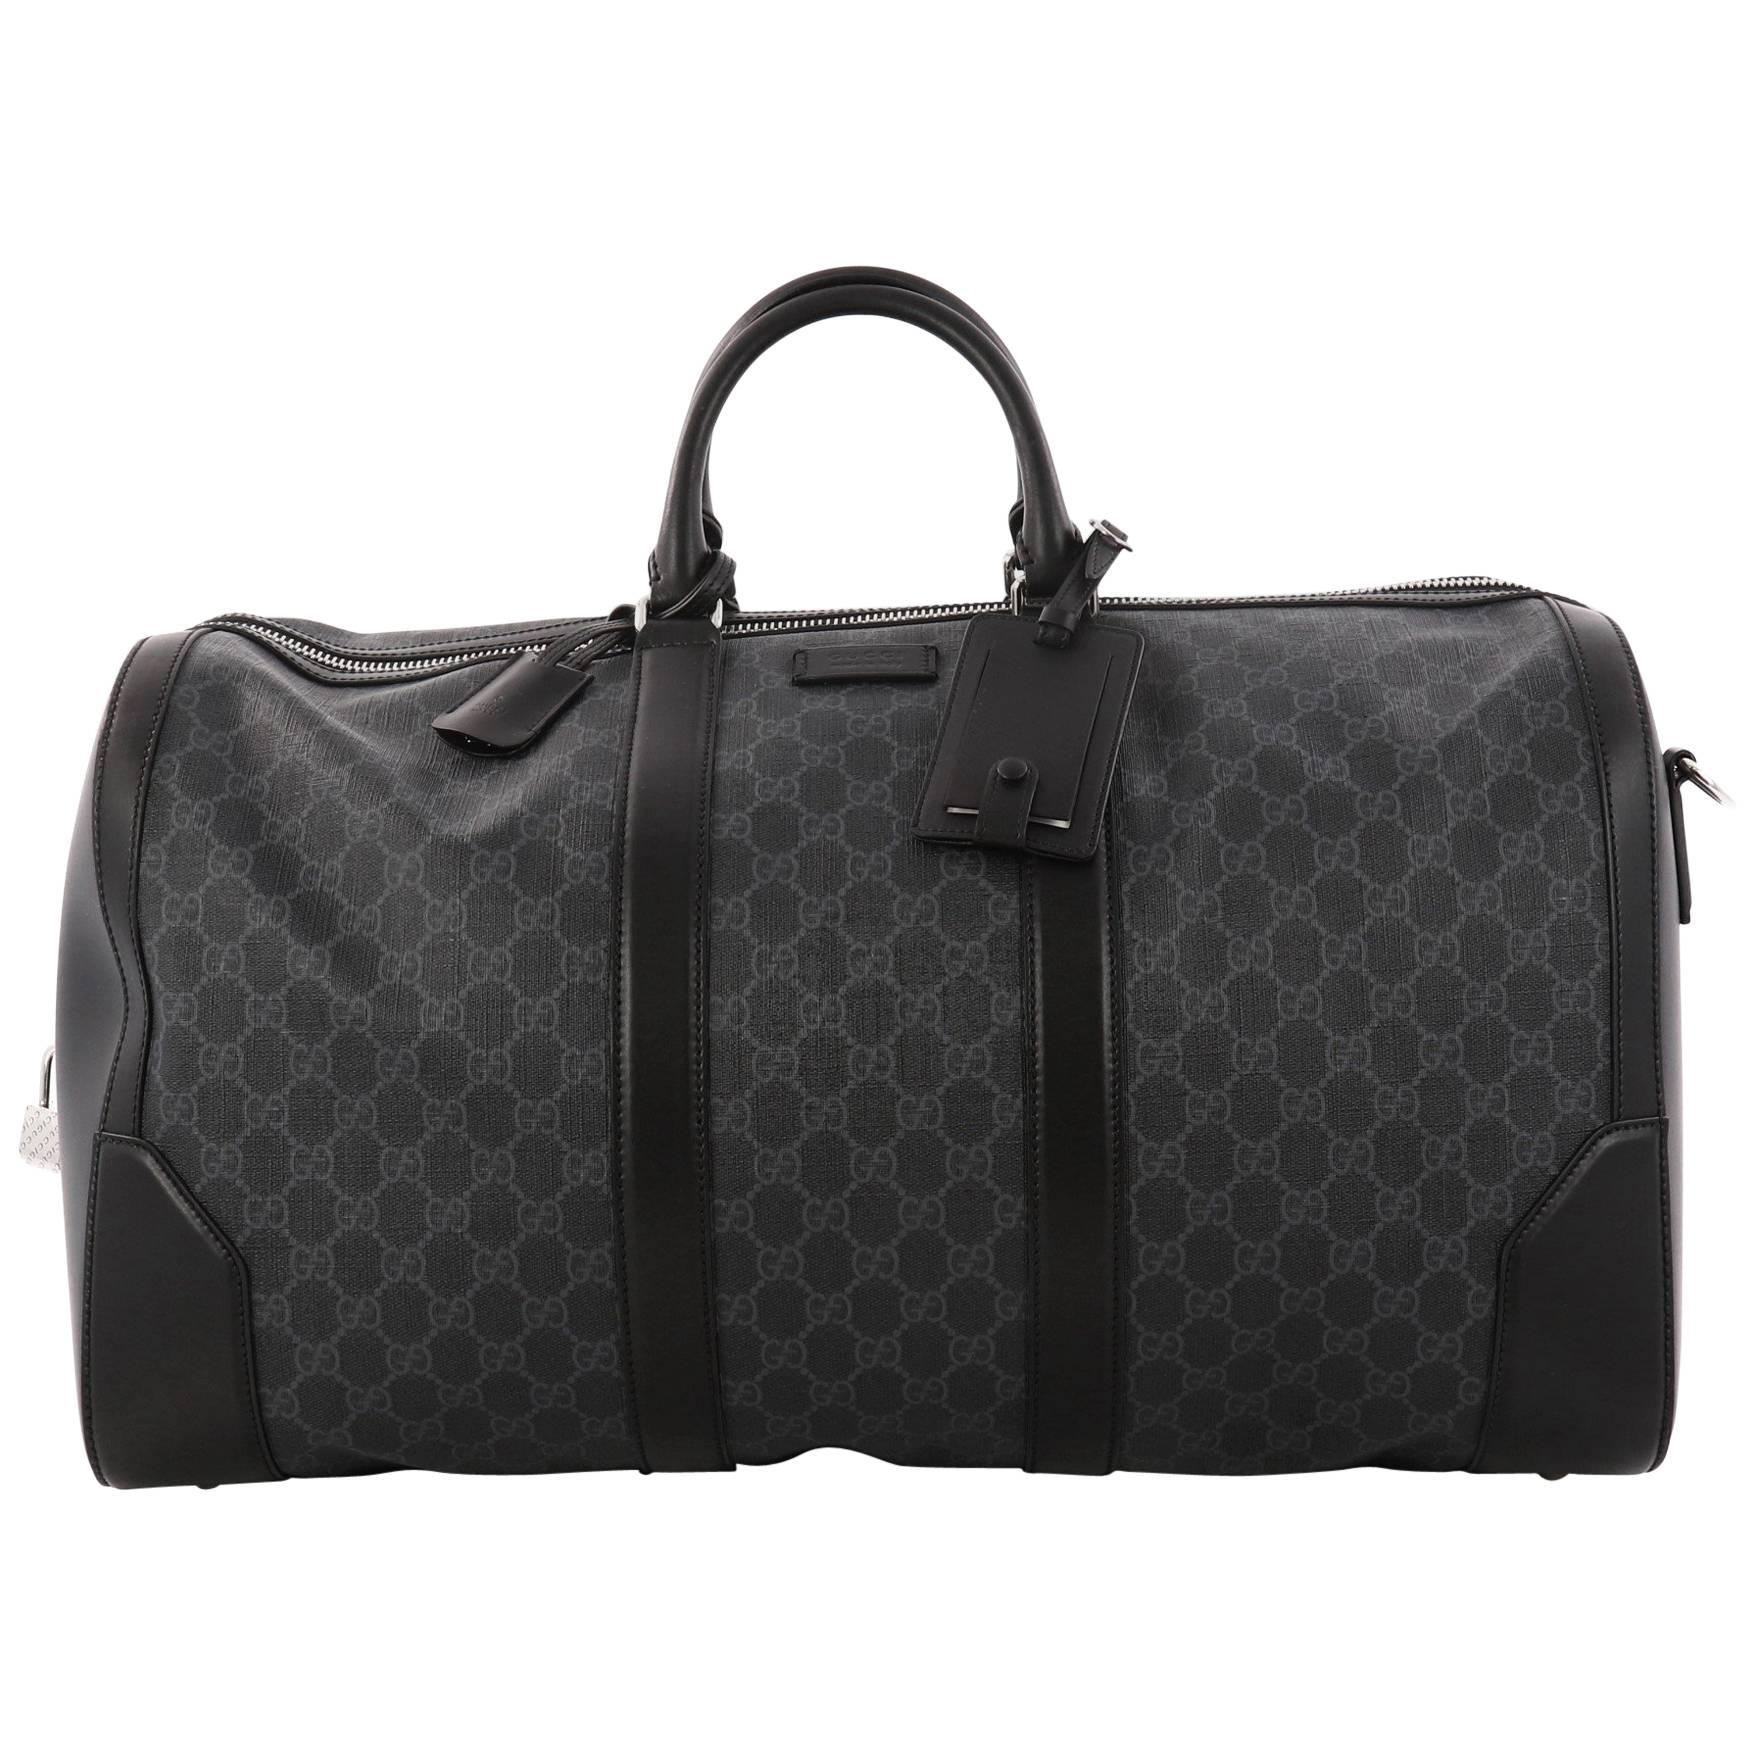  Gucci Convertible Duffle Bag GG Coated Canvas Large